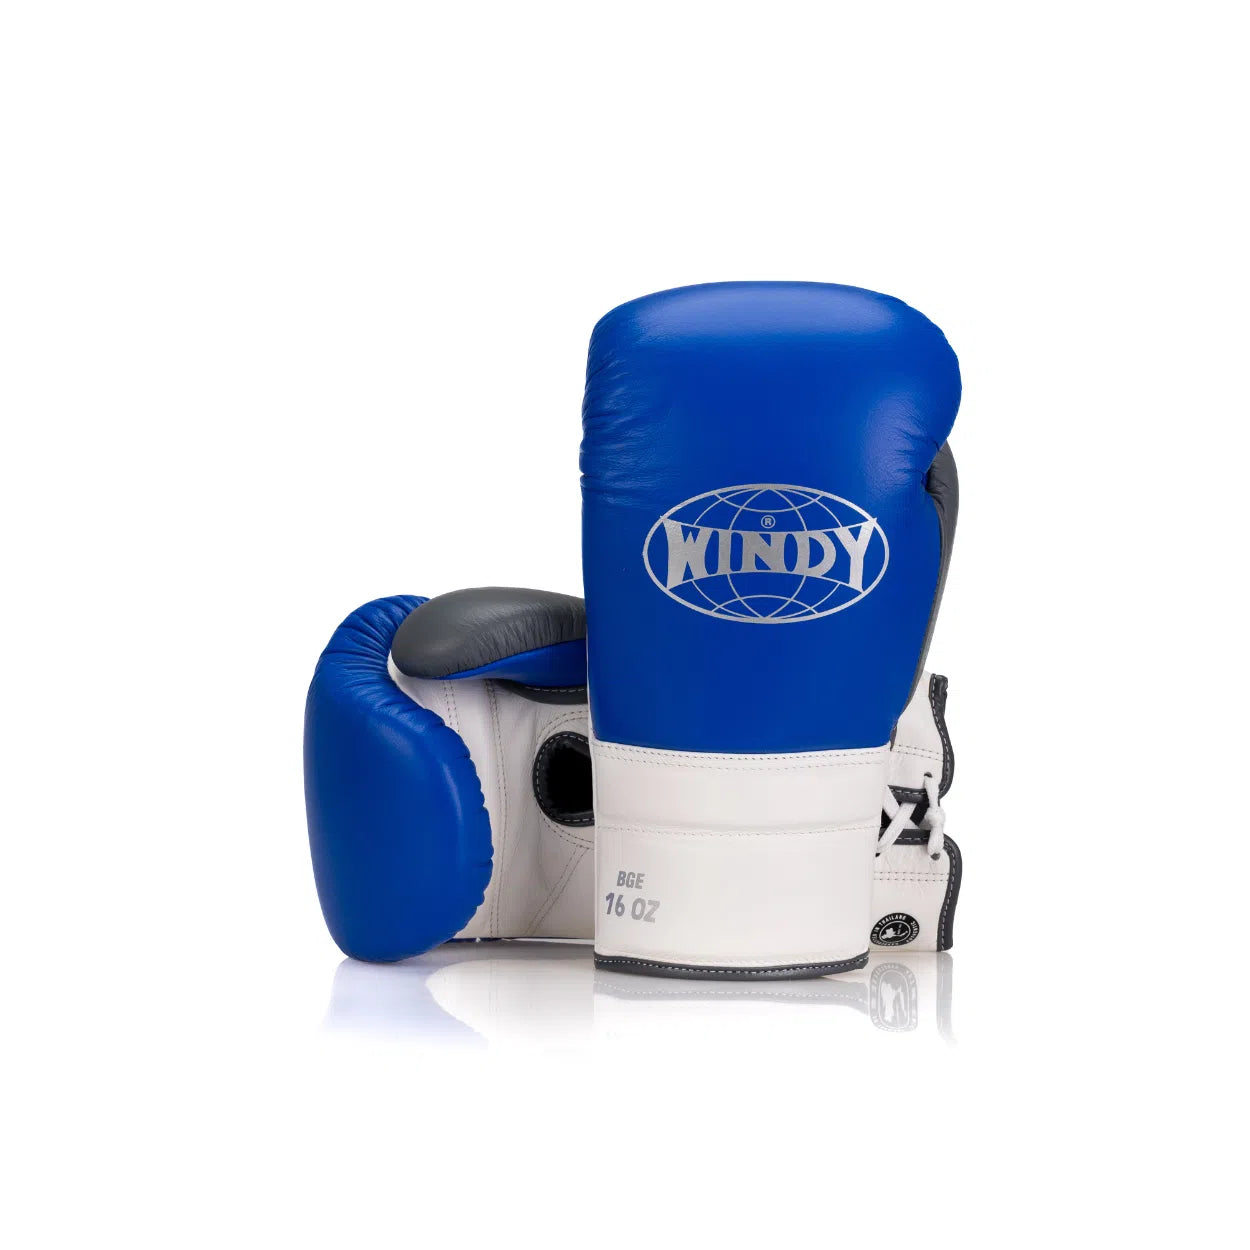 Elite Series Lace-up Boxing Glove - Blue/Grey/White